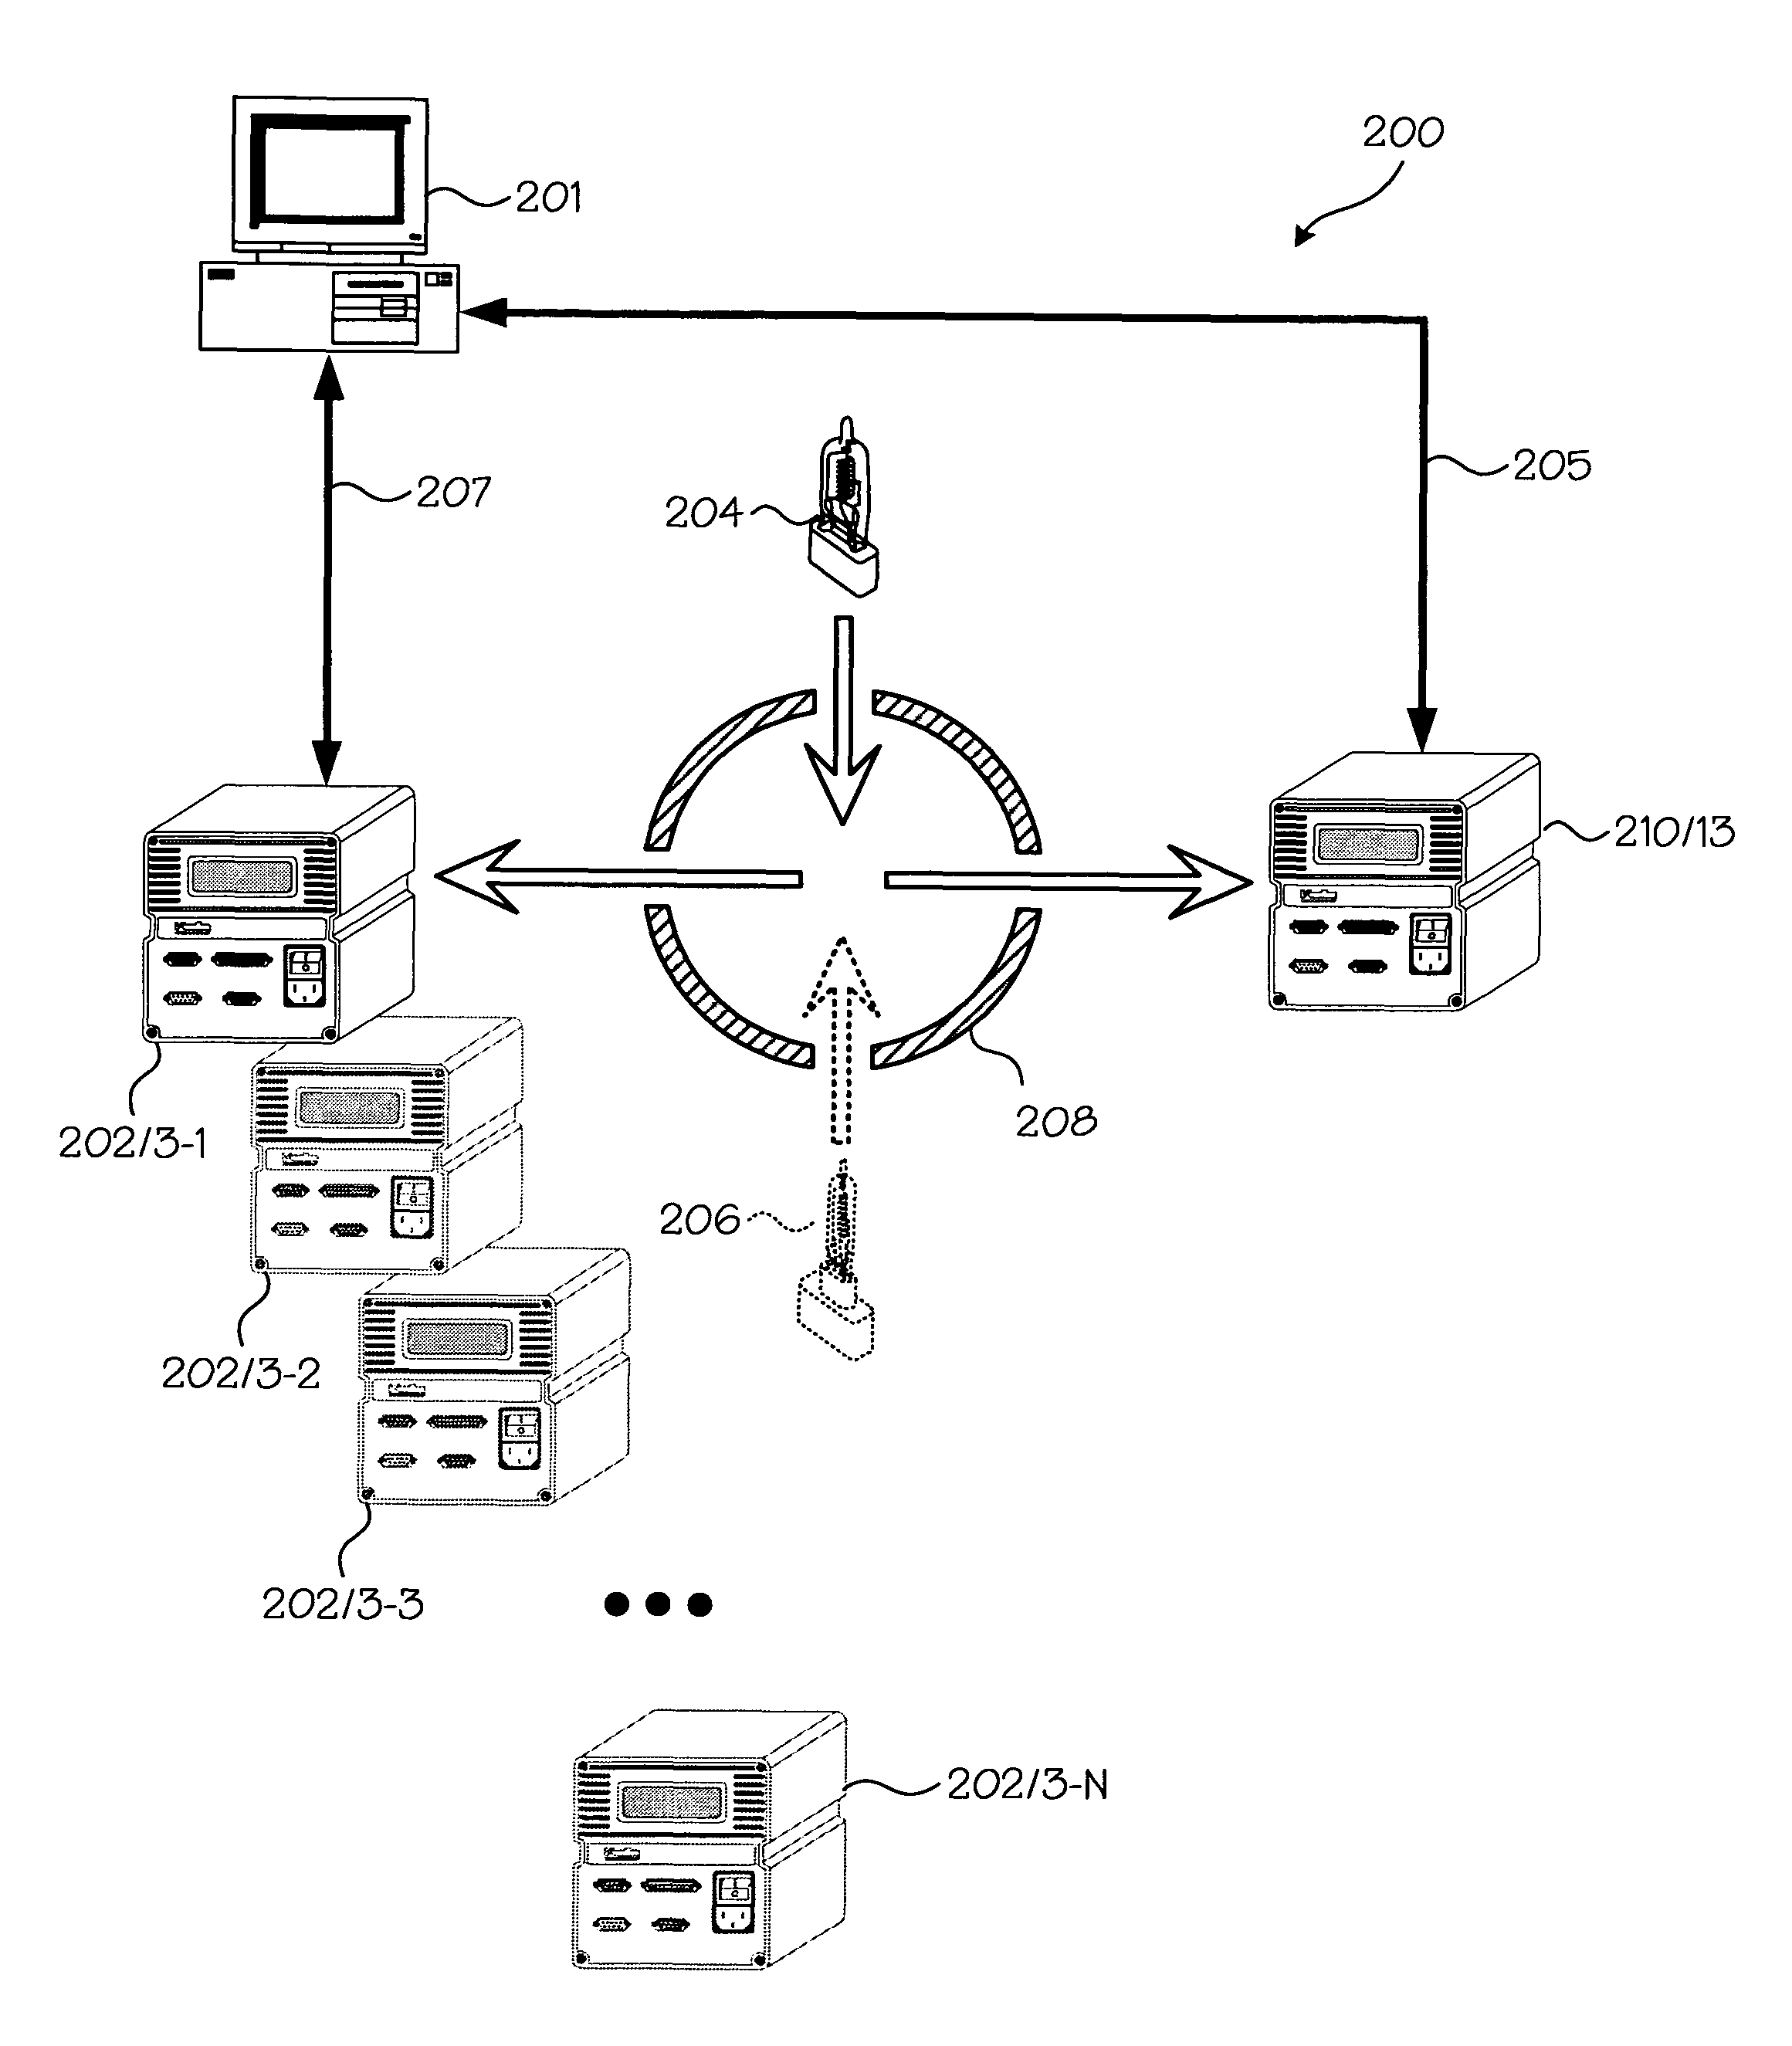 Calibration of a radiometric optical monitoring system used for fault detection and process monitoring